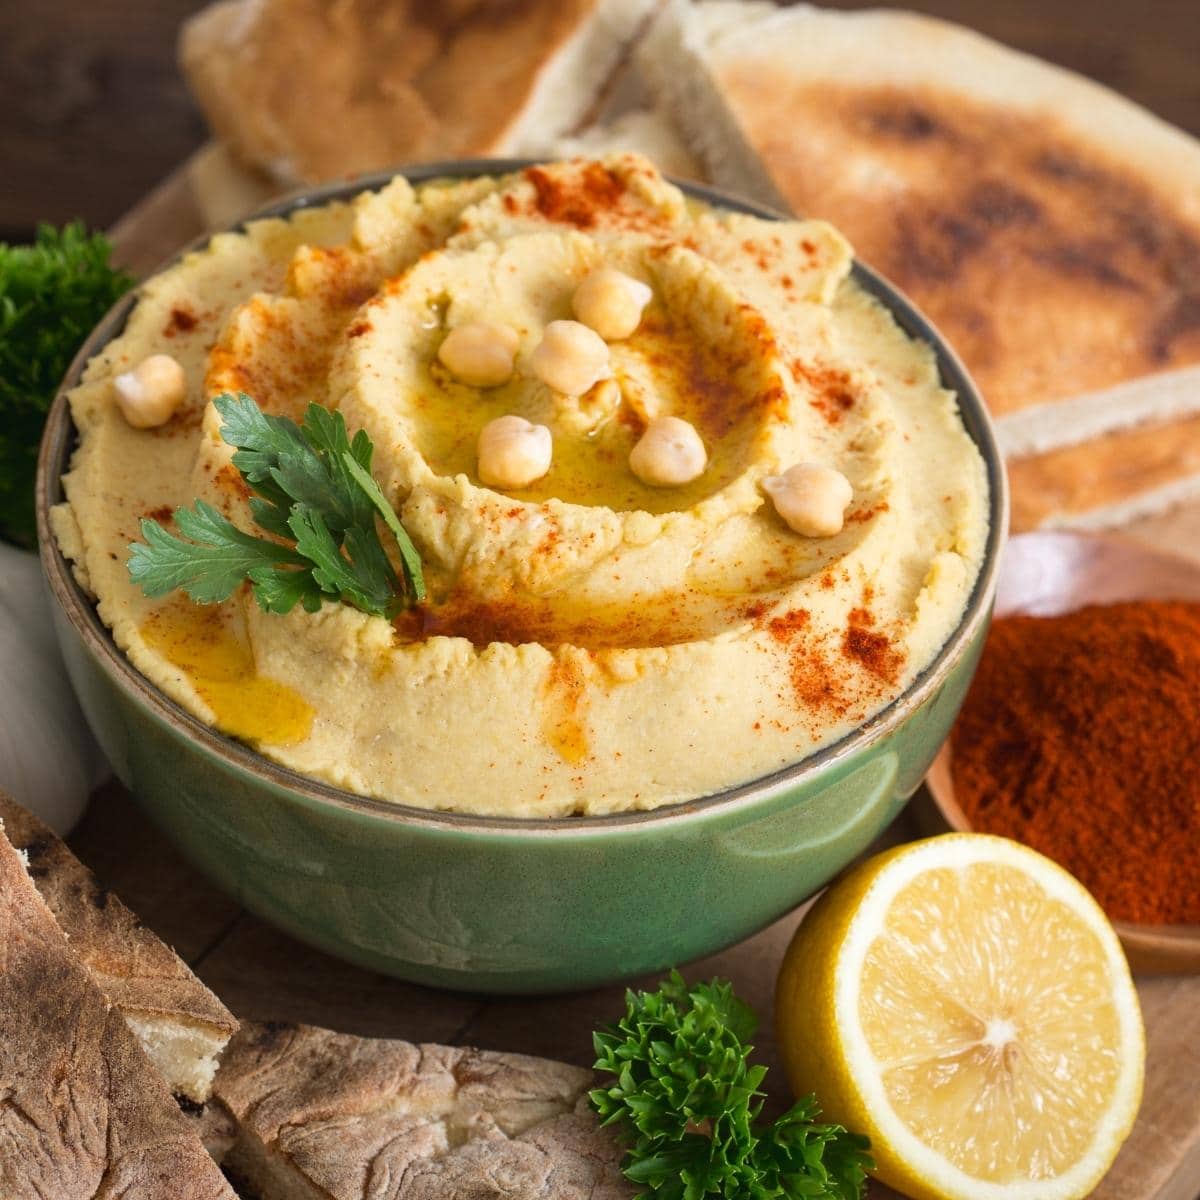 a bowl of hummus topped with chickpeas, olive oil, paprika and parsley.